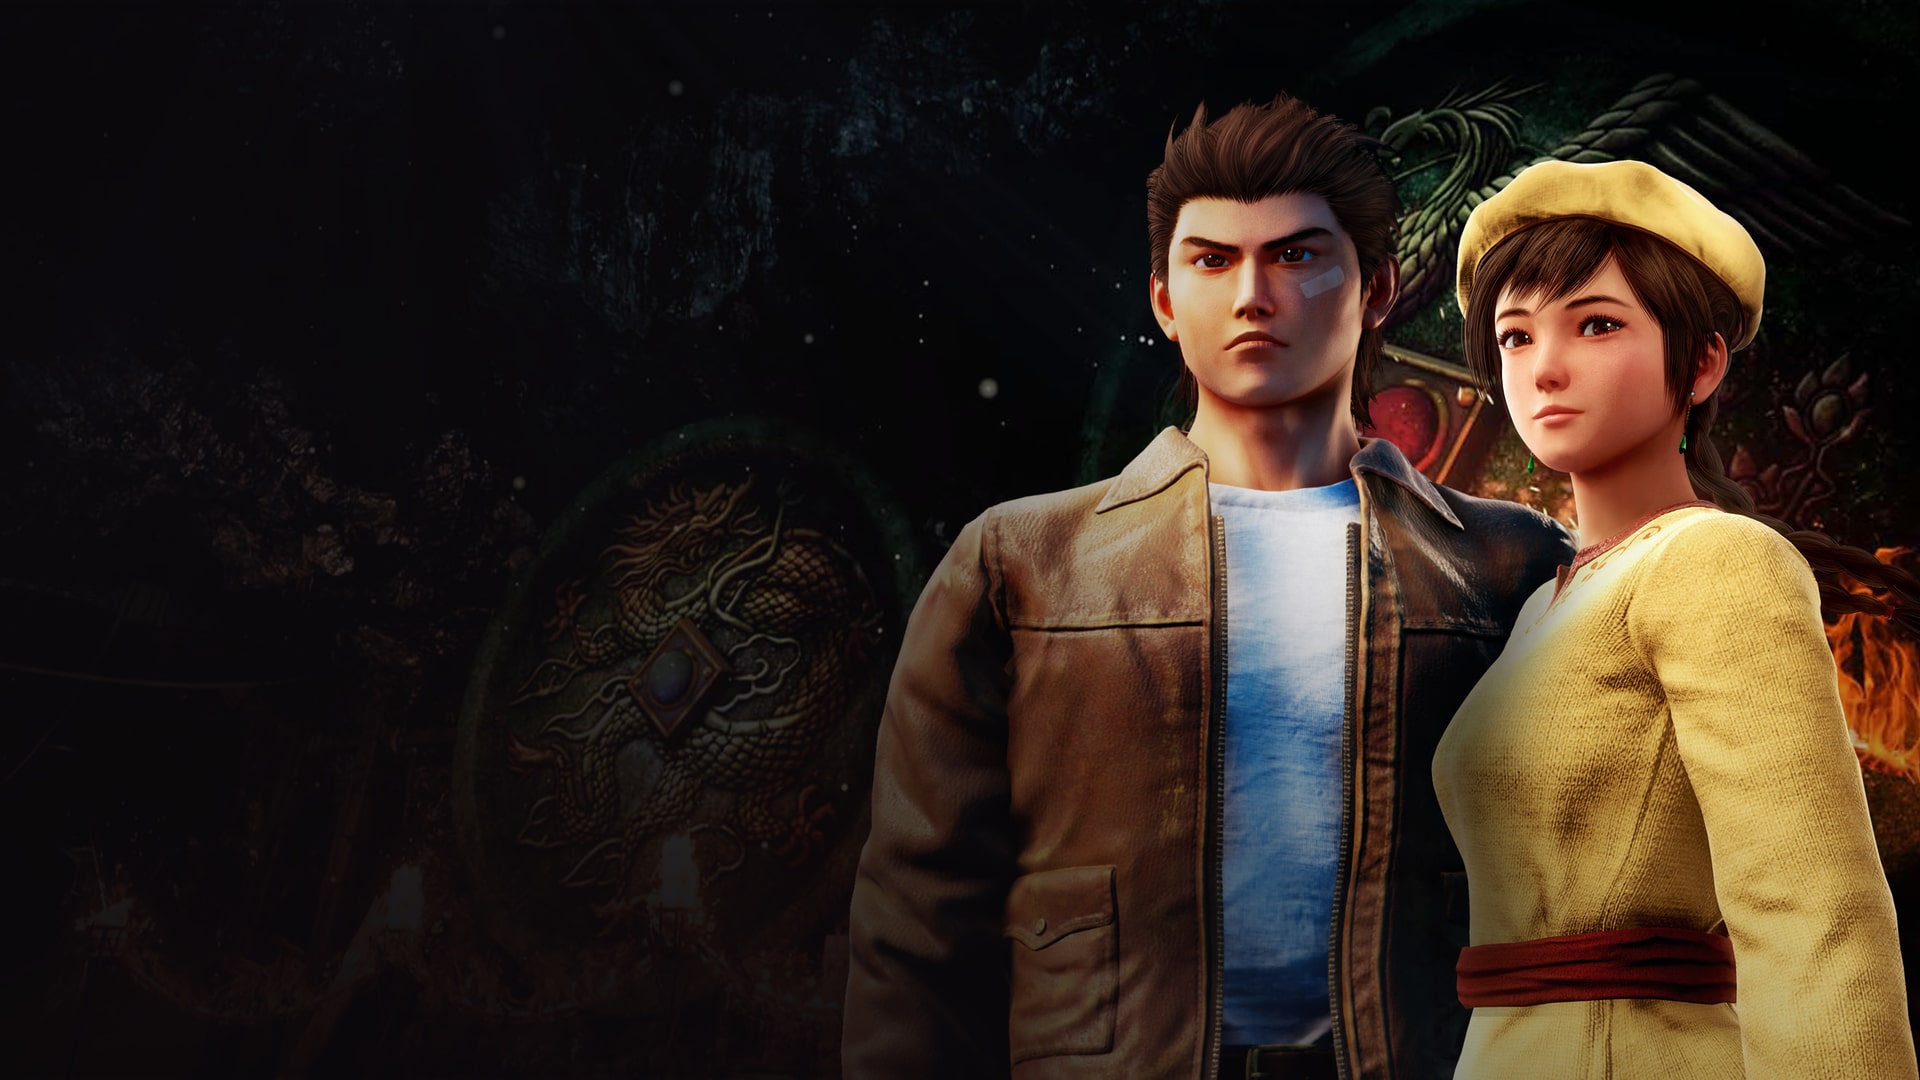 Shenmue III - Digital Deluxe Edition (English/Chinese/Japanese Ver.)